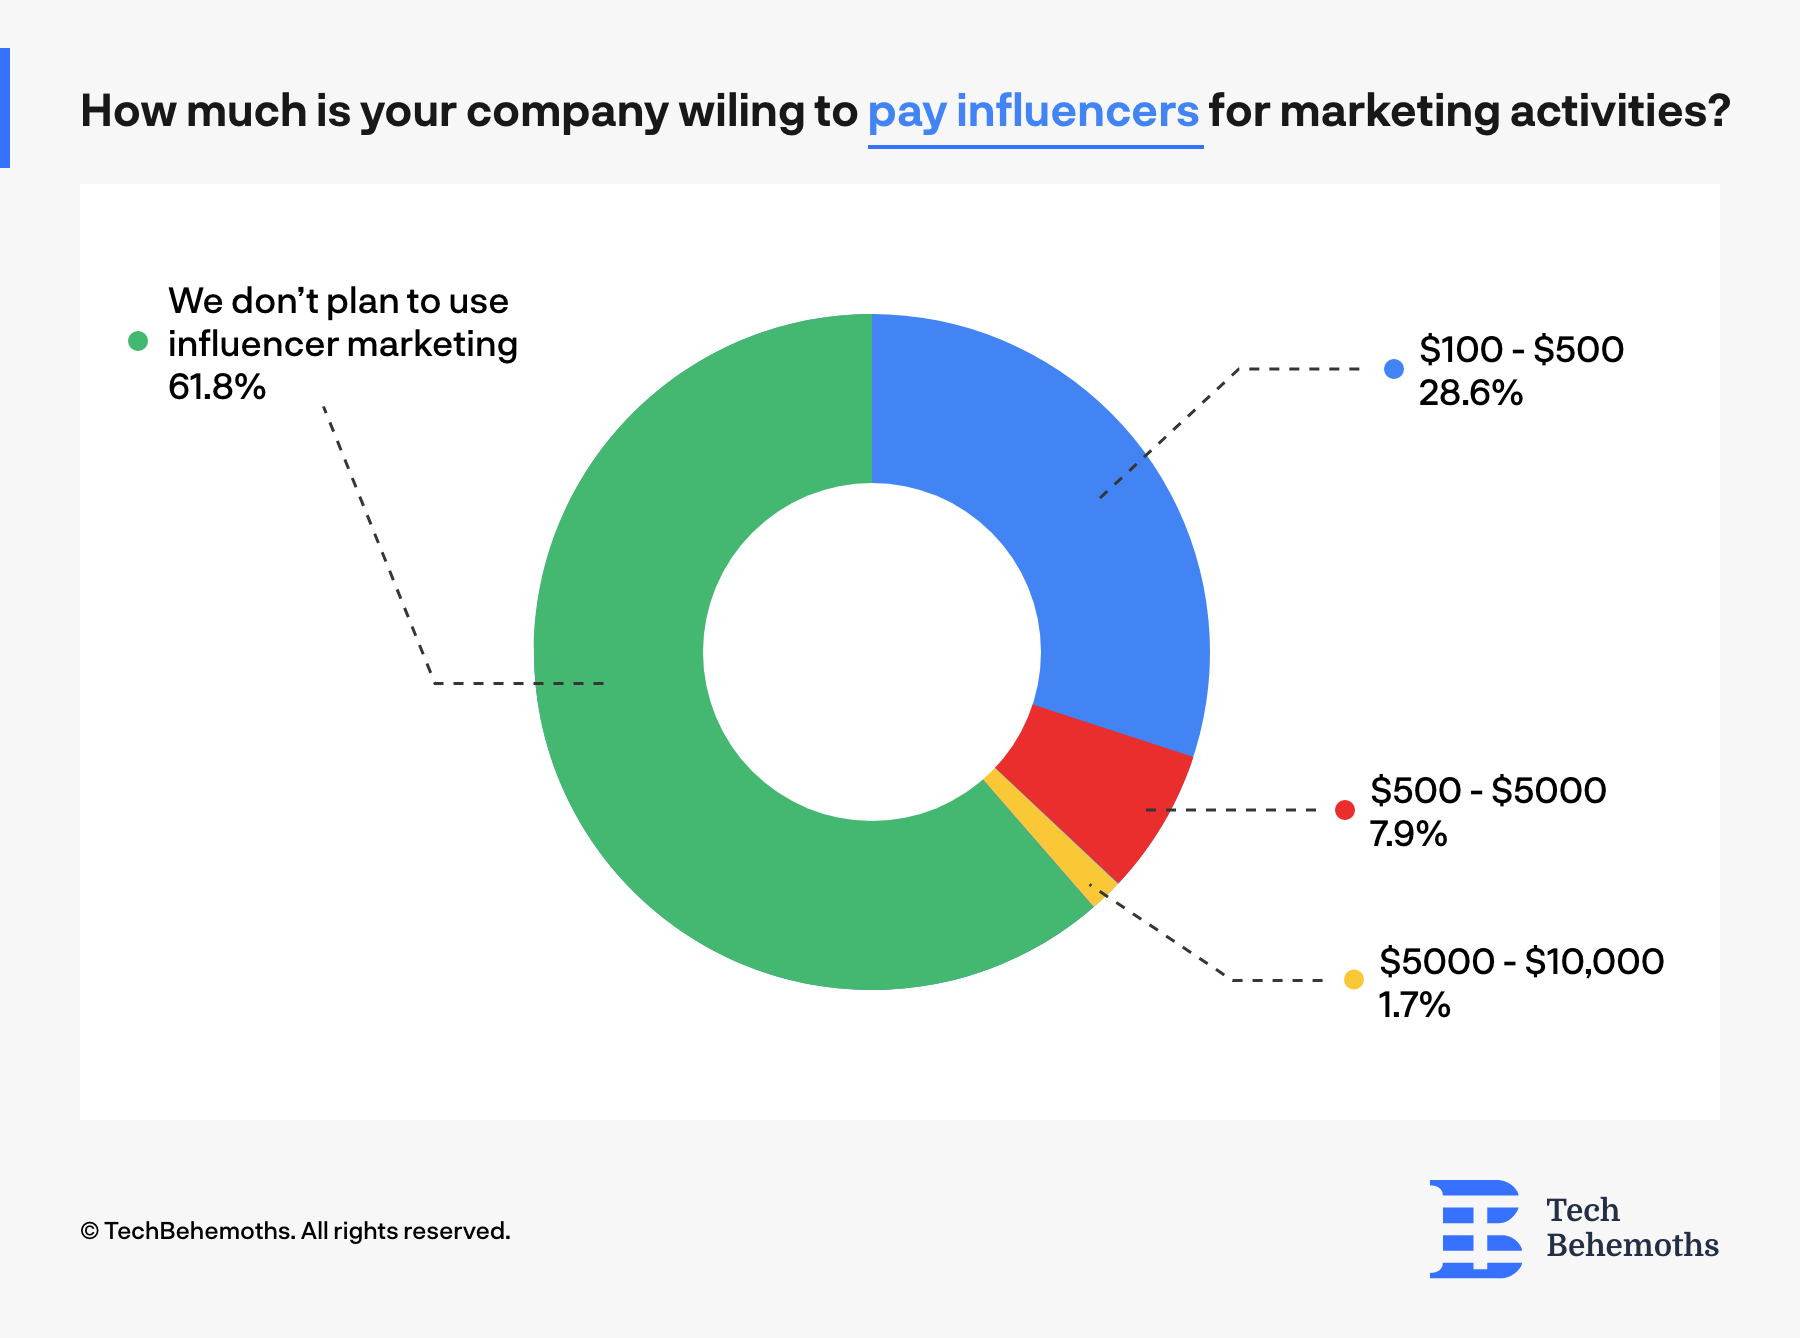 61% of IT companies don't plan to invest in influencer marketing - survey results show